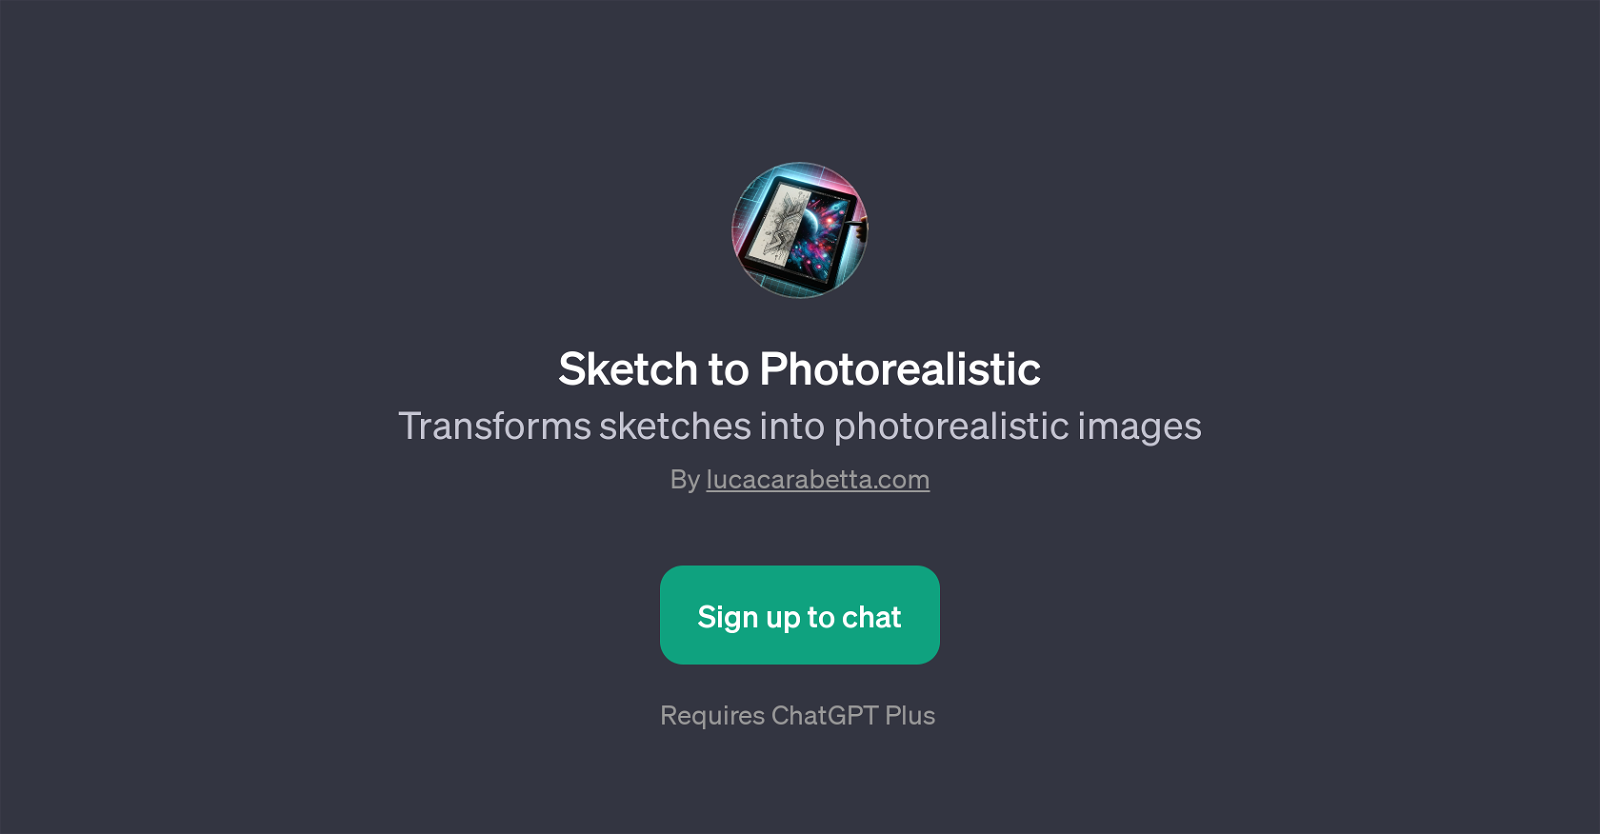 Sketch to Photorealistic website